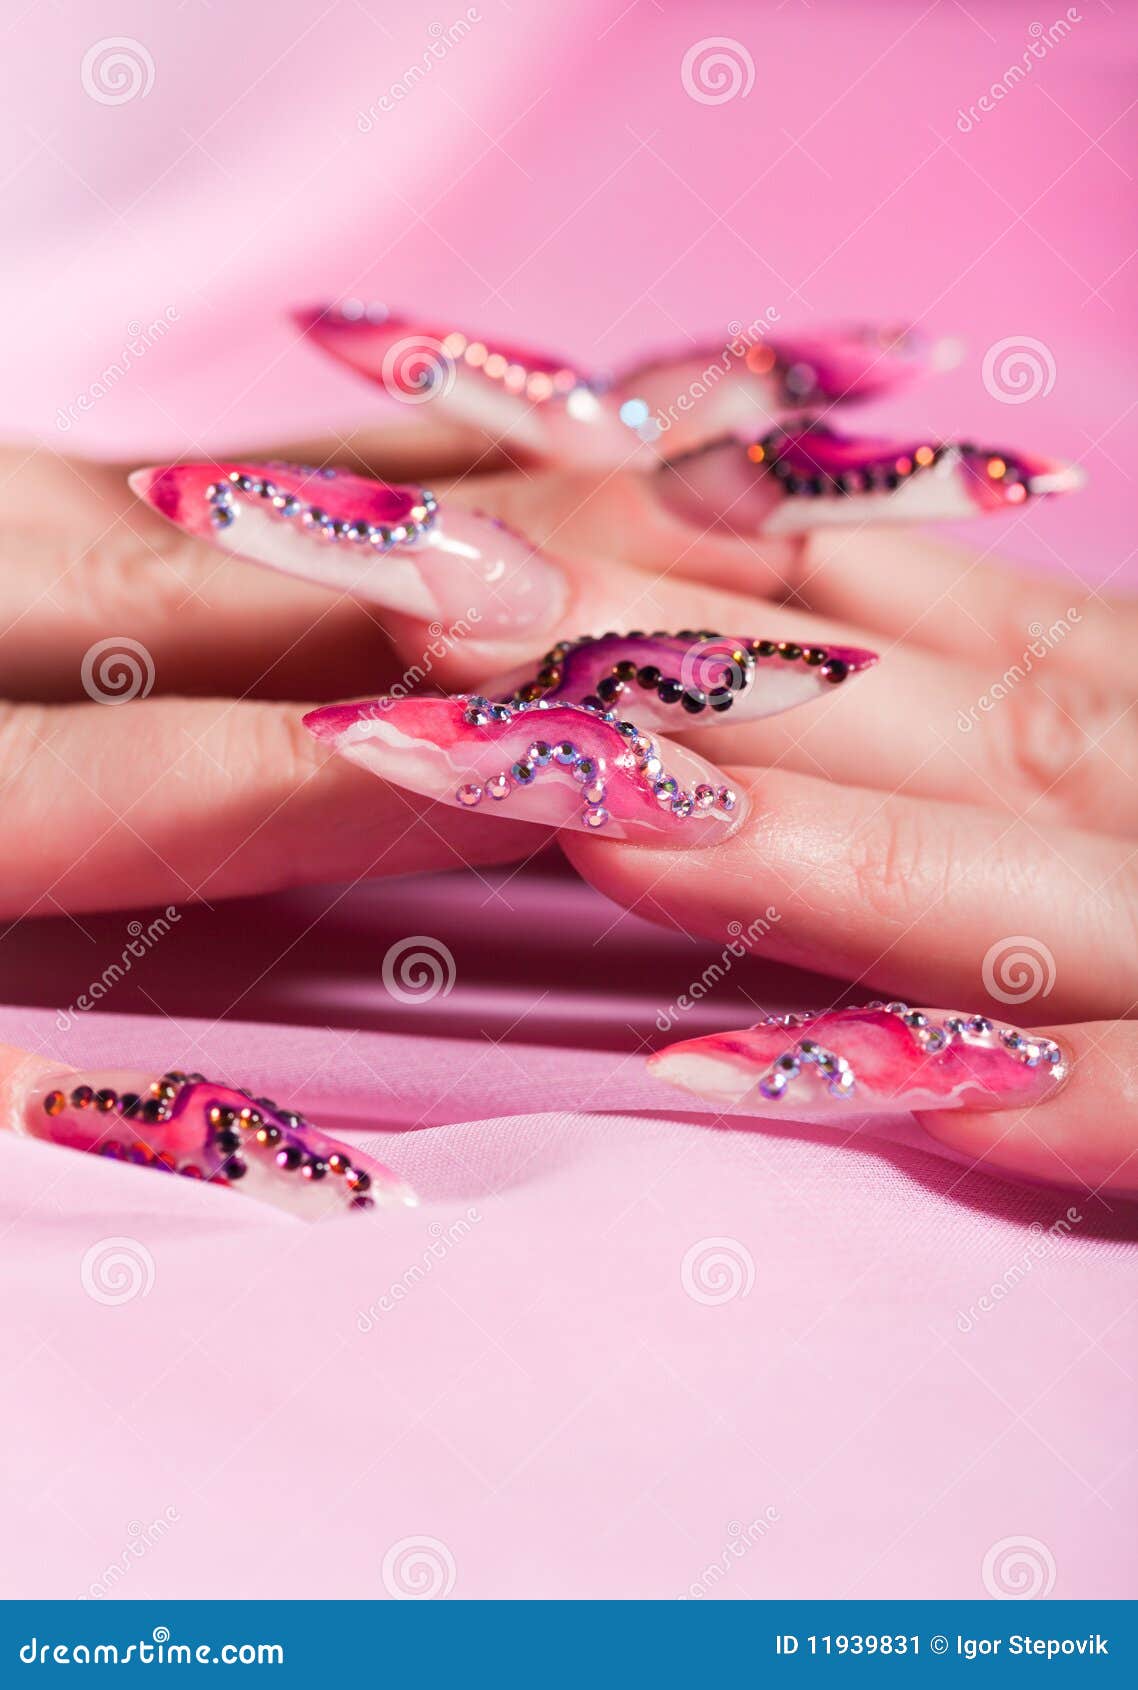 human fingers with long fingernail over pink